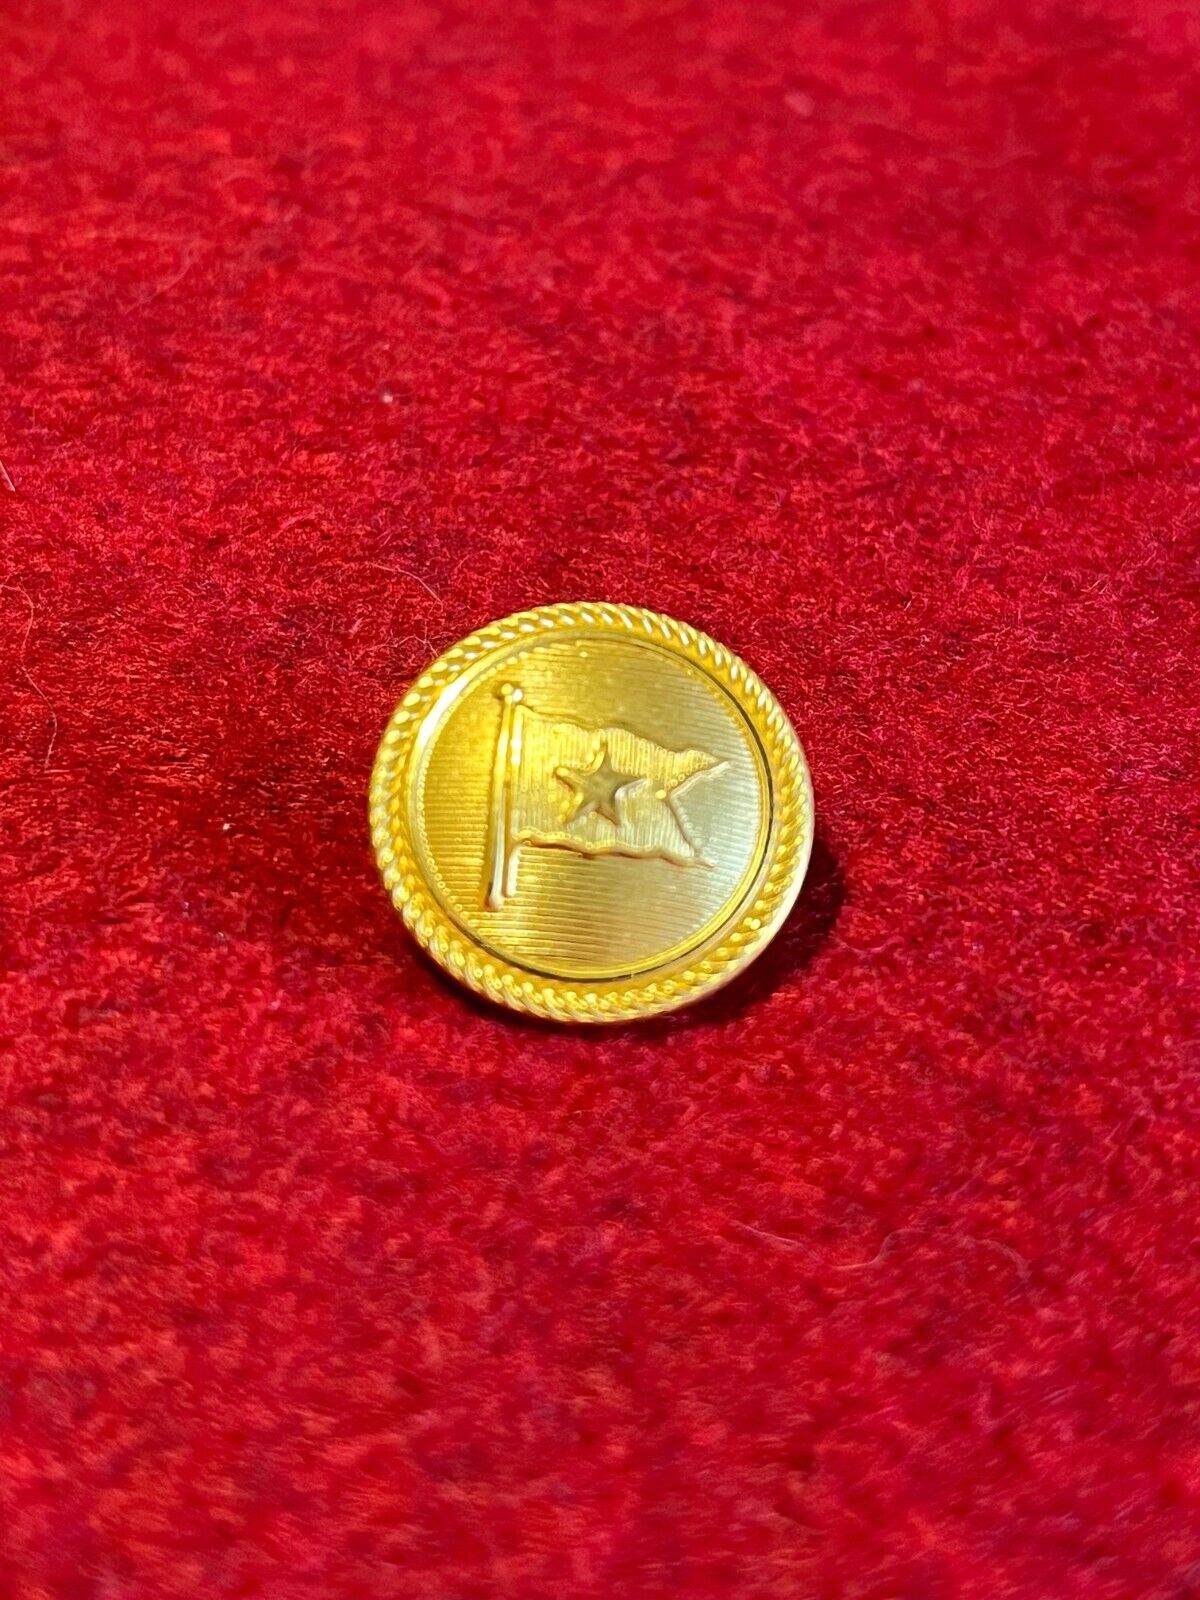 WSL RMS TITANIC OFFICERS JACKET BUTTON, BRASS REPLICA IN STOCK NOW 1 INCH DIA.